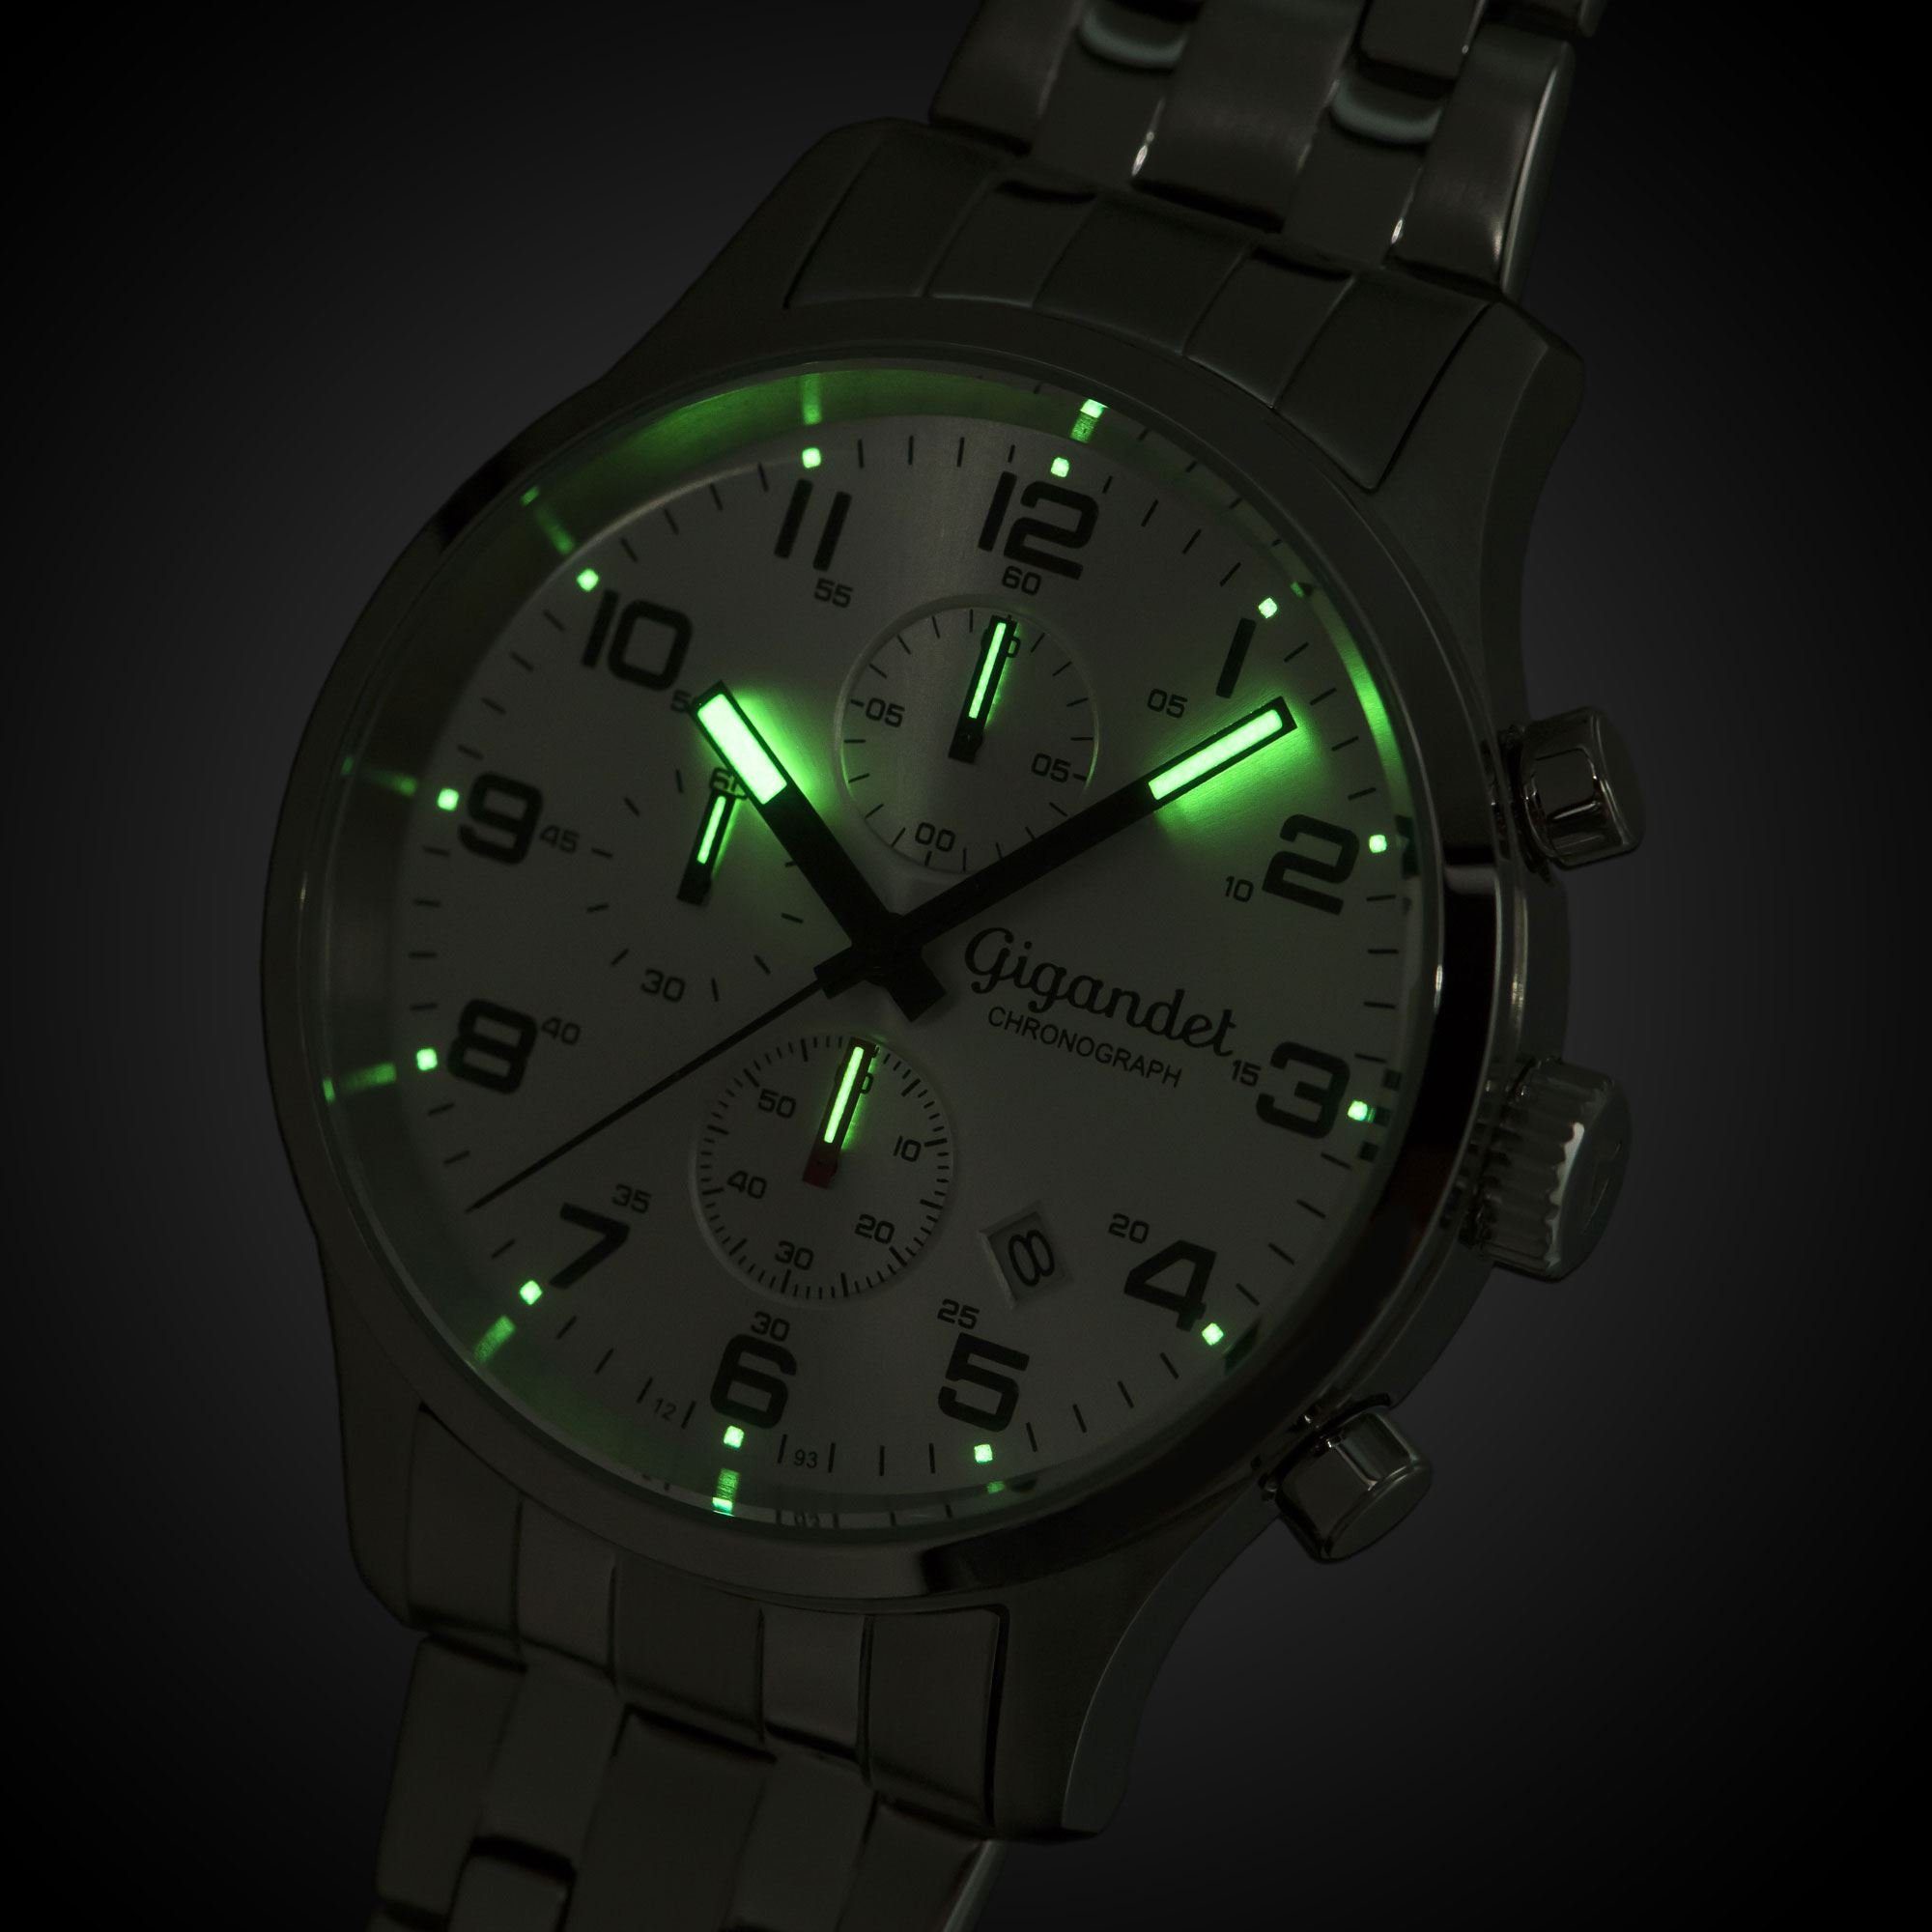 Gigandet Chronograph Touch, Mineralglas, Datum, Red Chronograph